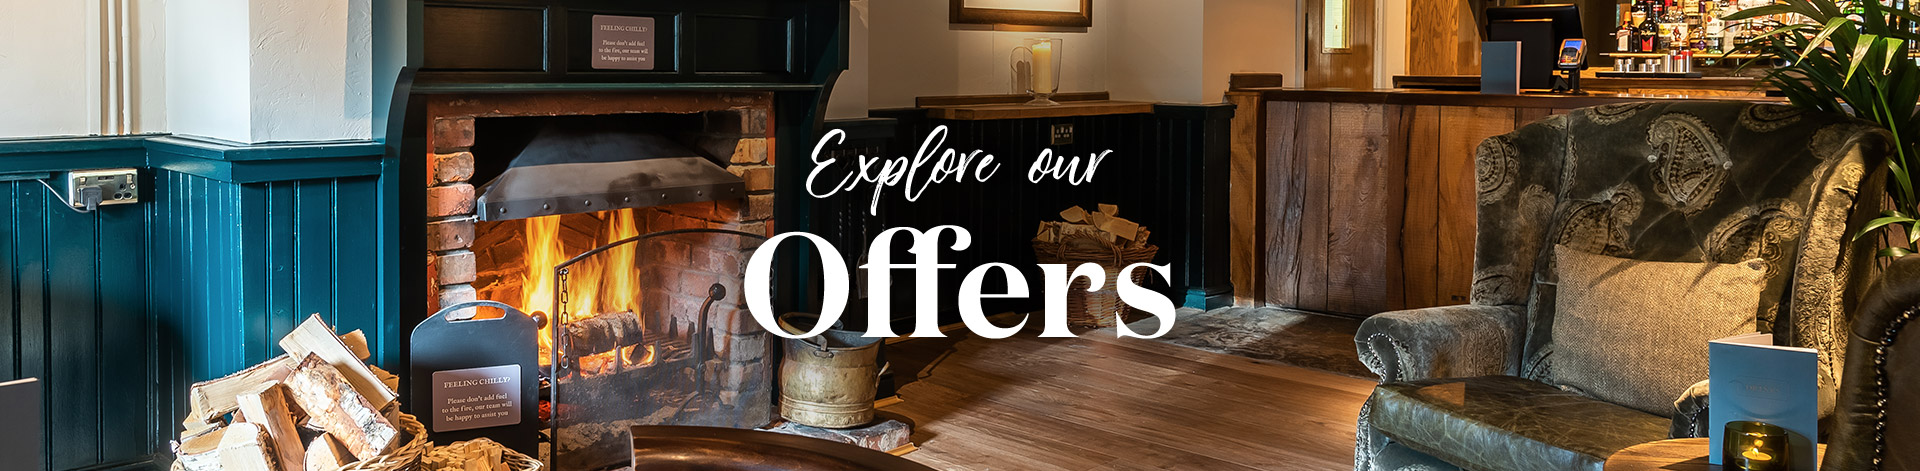 Our latest offers at The Bull's Head